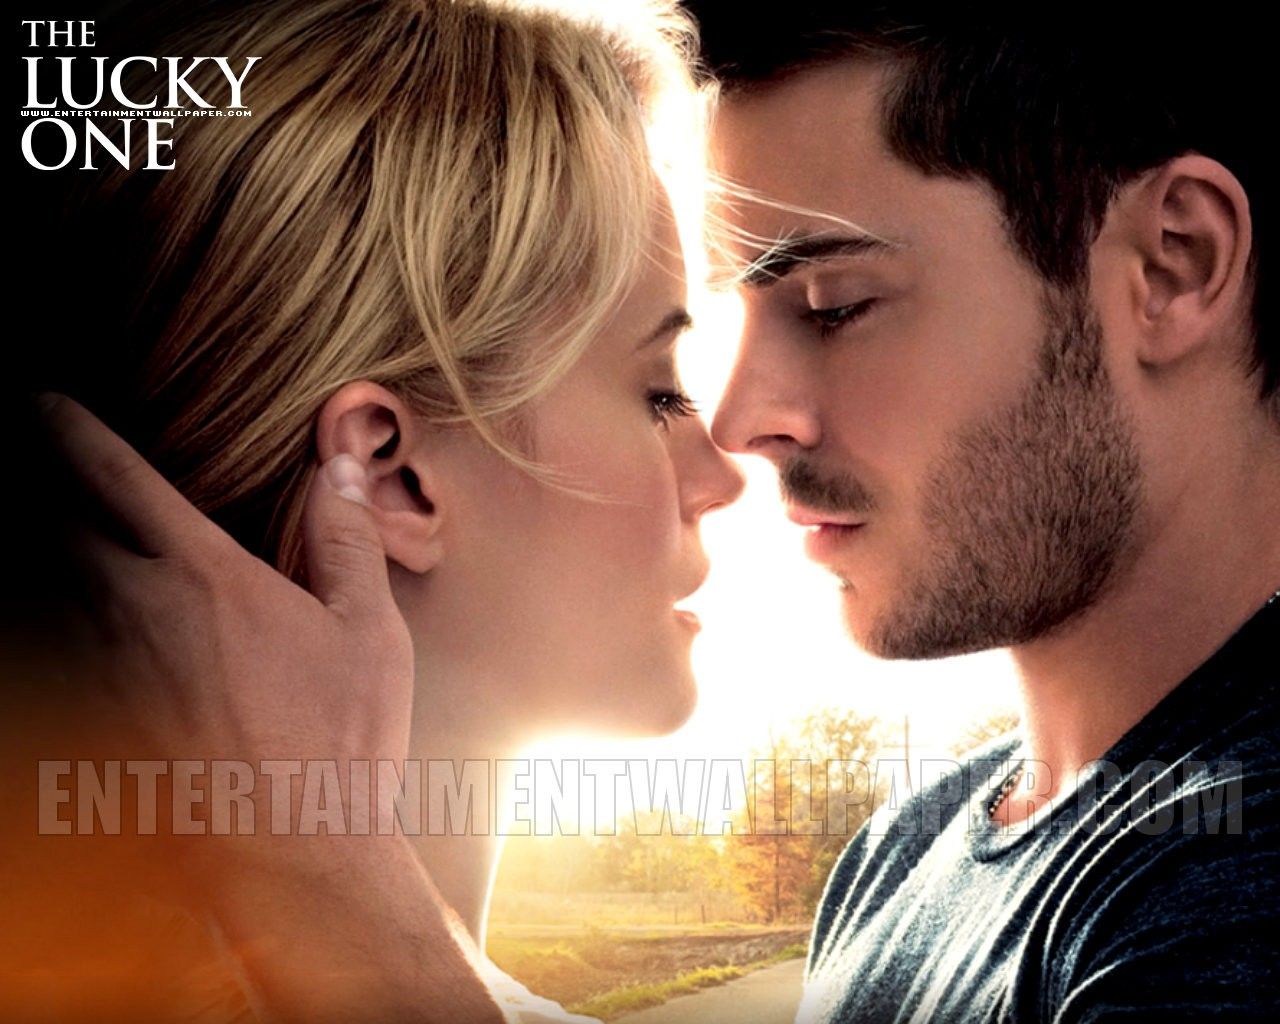 The Lucky One Wallpaper. iPhone